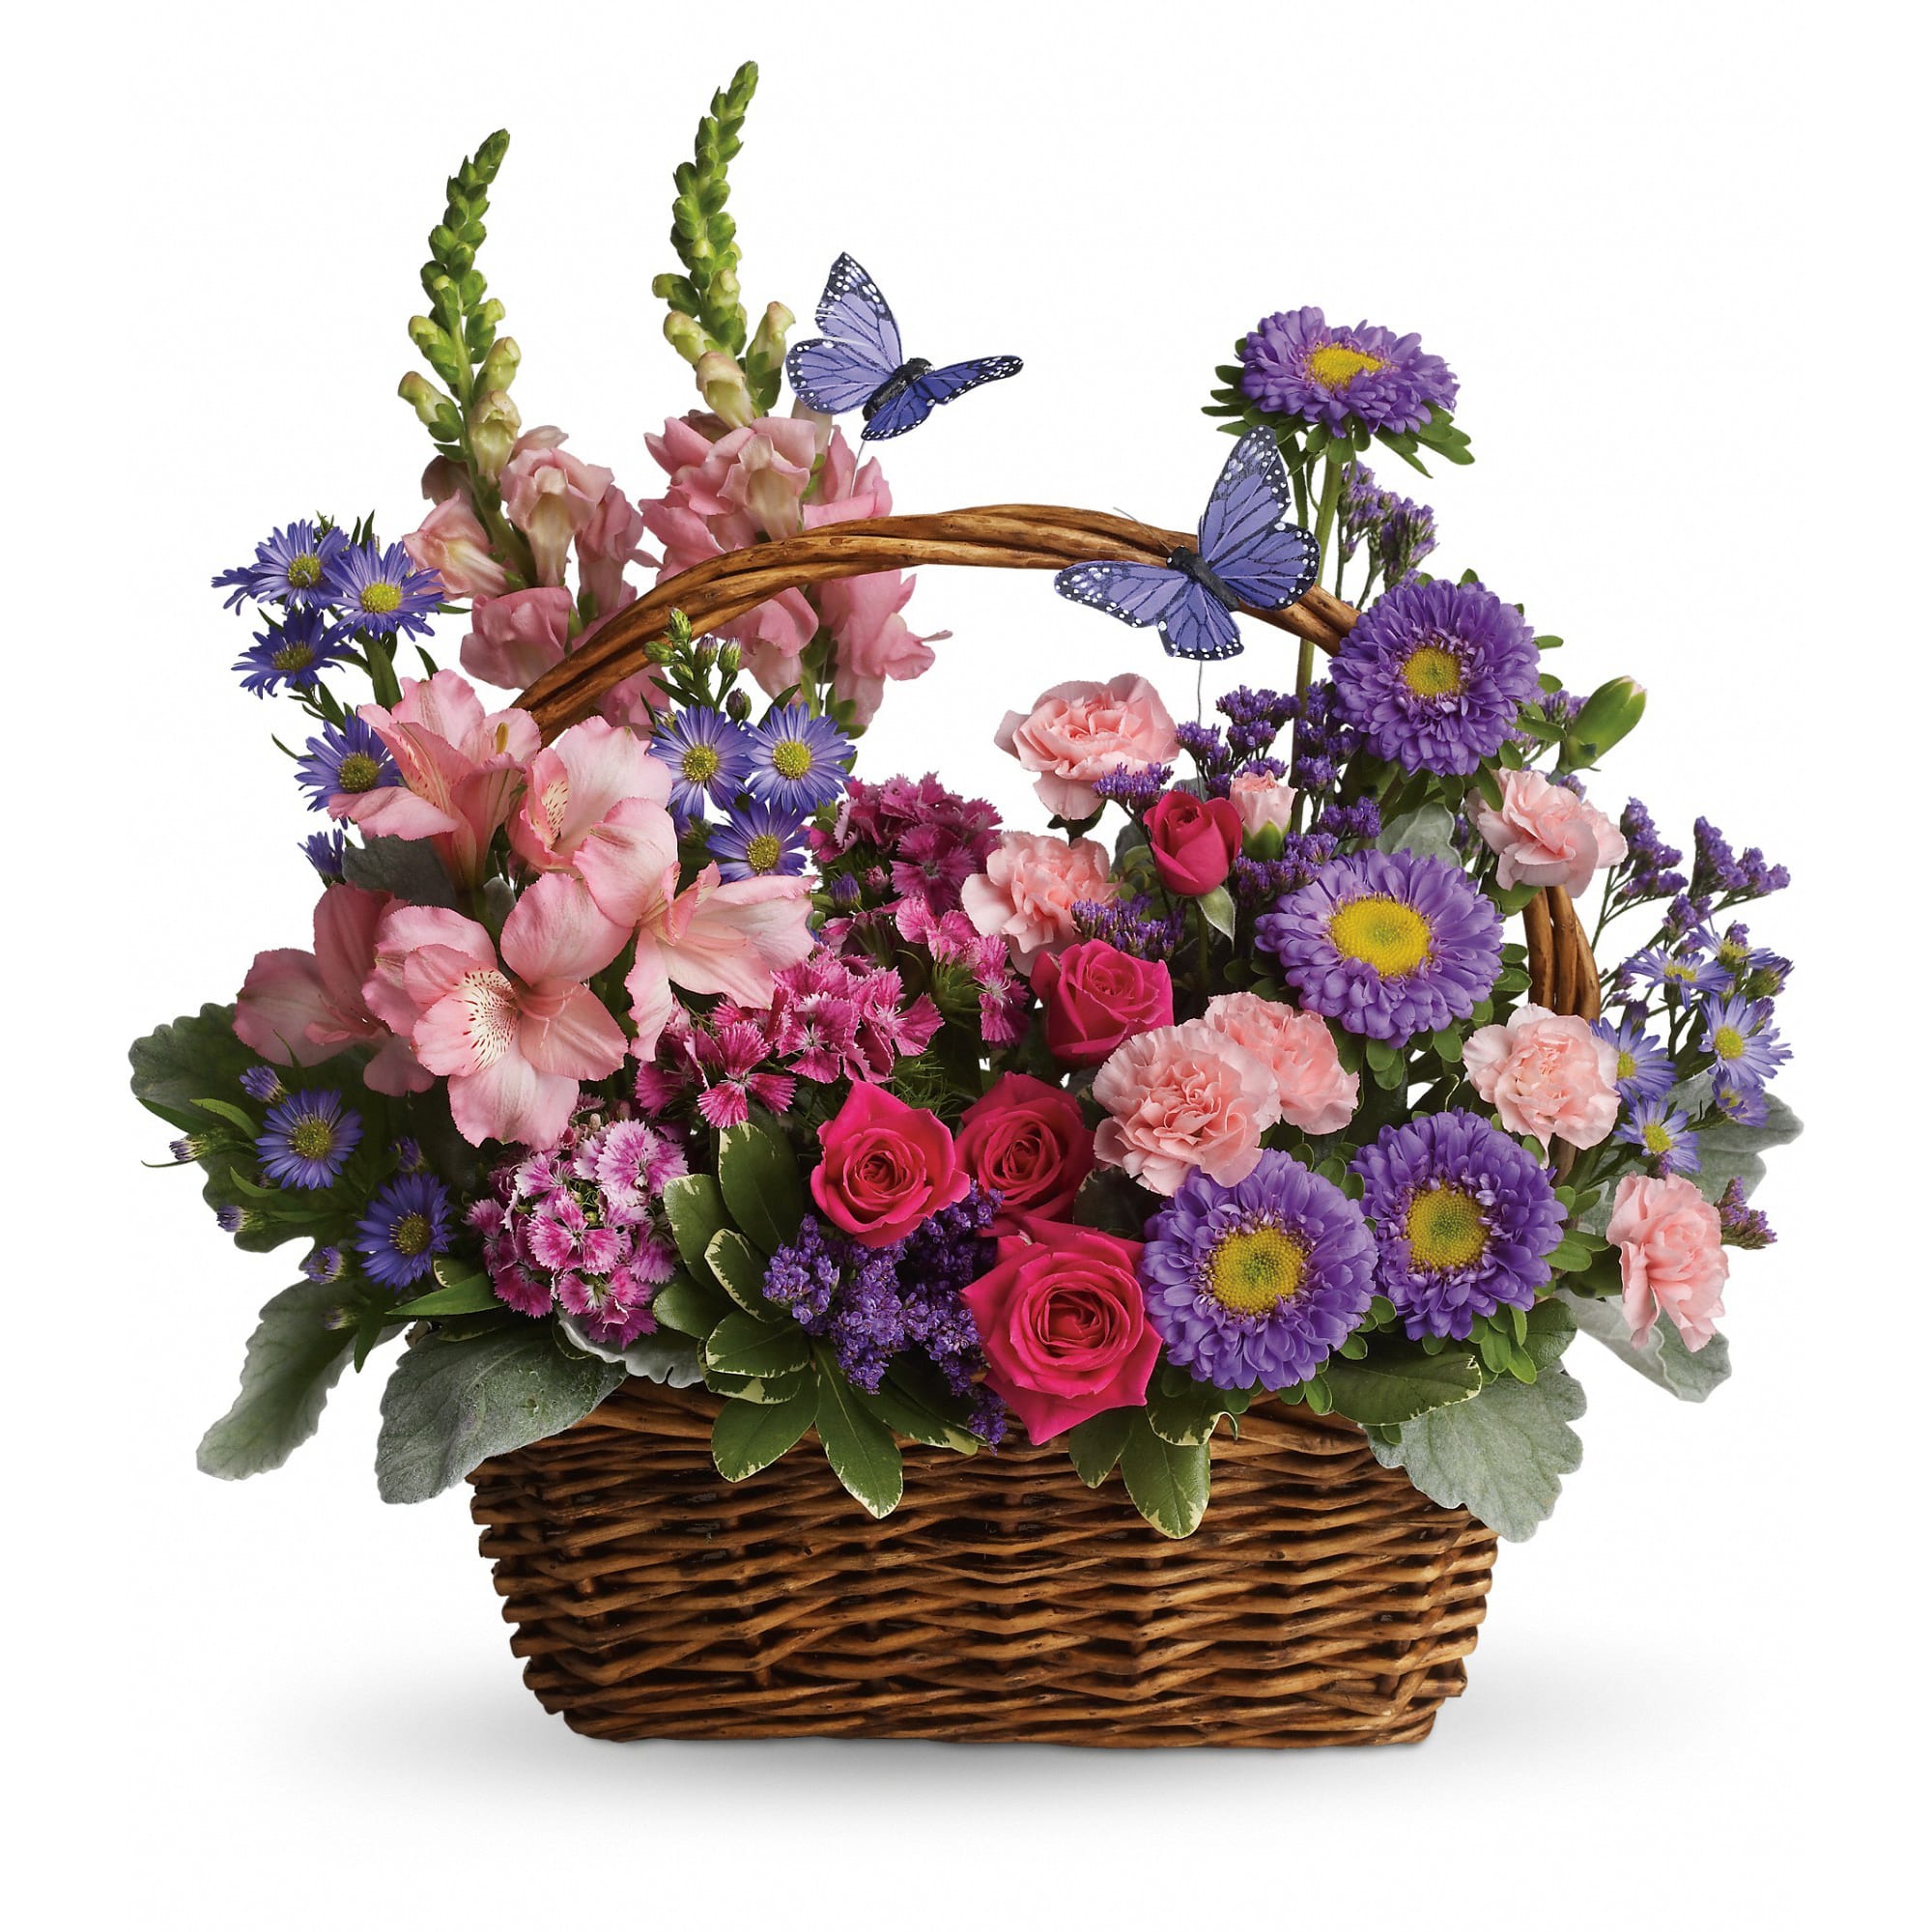 Country Basket Blooms by Teleflora - Talk about a bountiful basket! This wicker basket is overflowing with beauty and blossoms. It's no wonder two pretty butterflies have made this basket their home. 